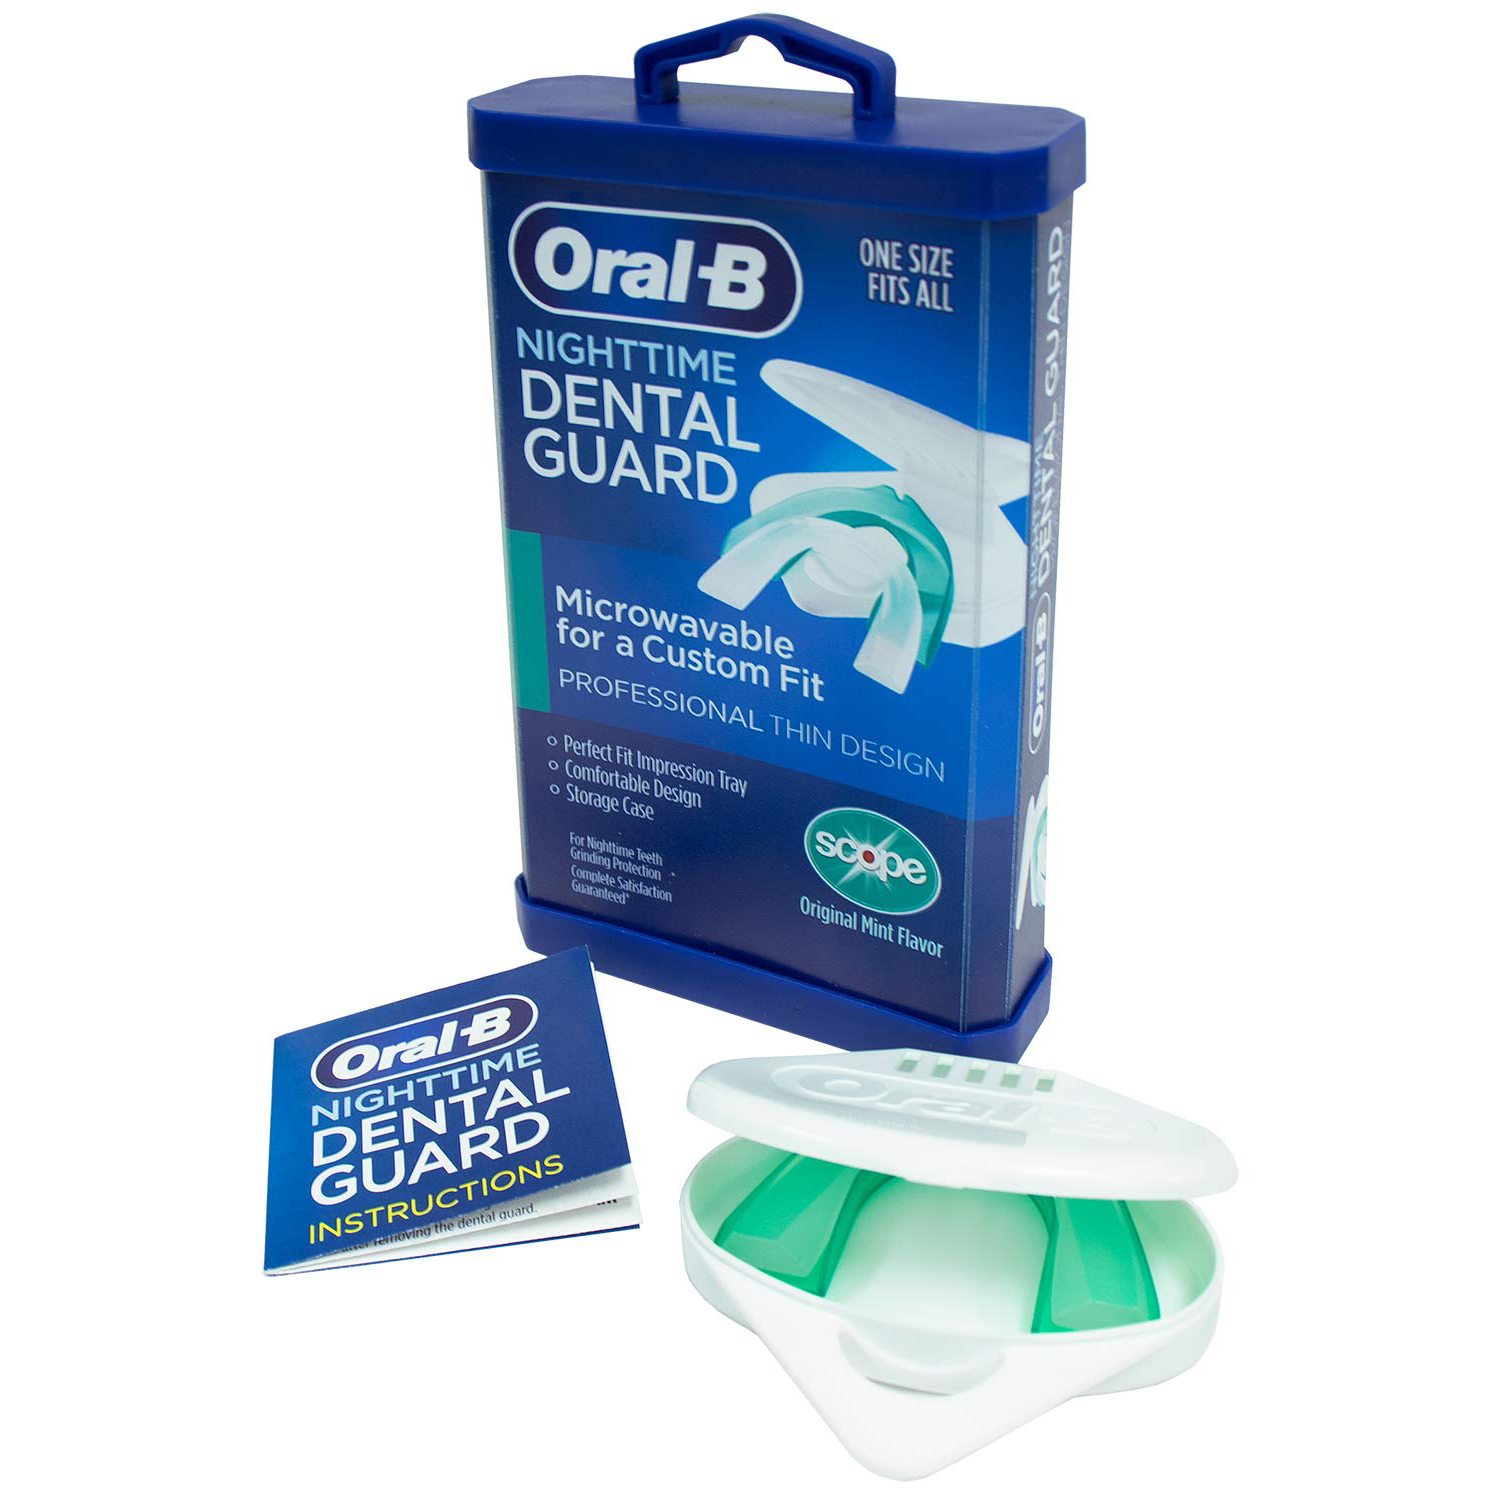 Oral-B Product Shot